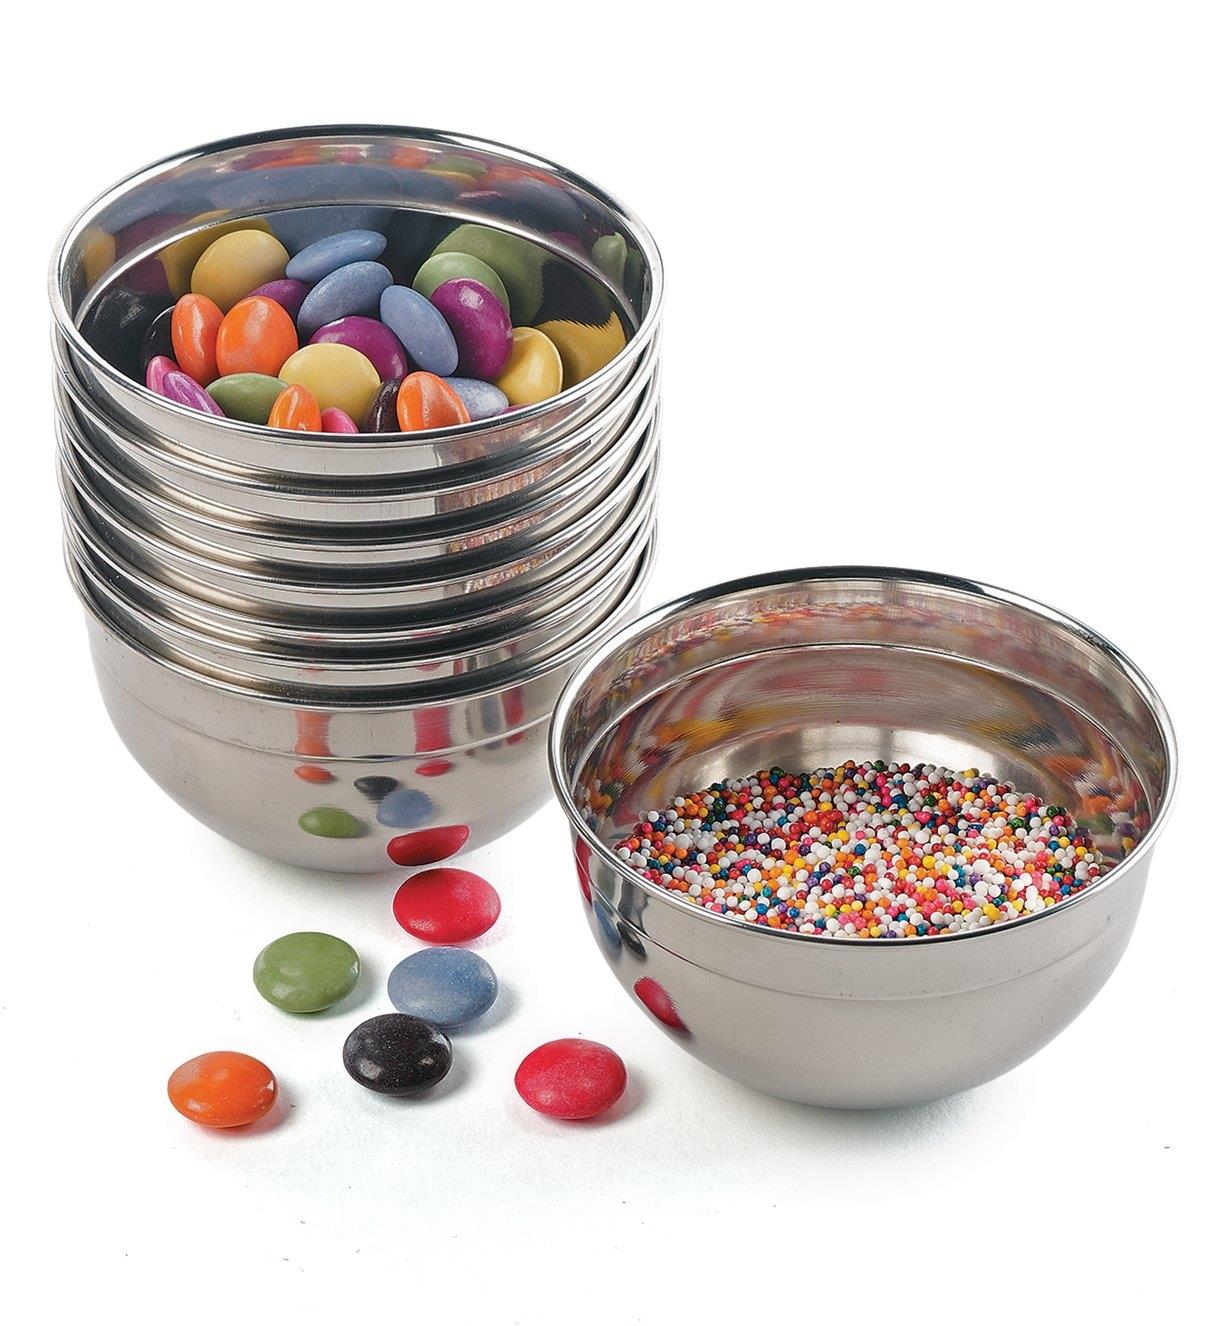 Stainless-Steel Bowls filled with candies